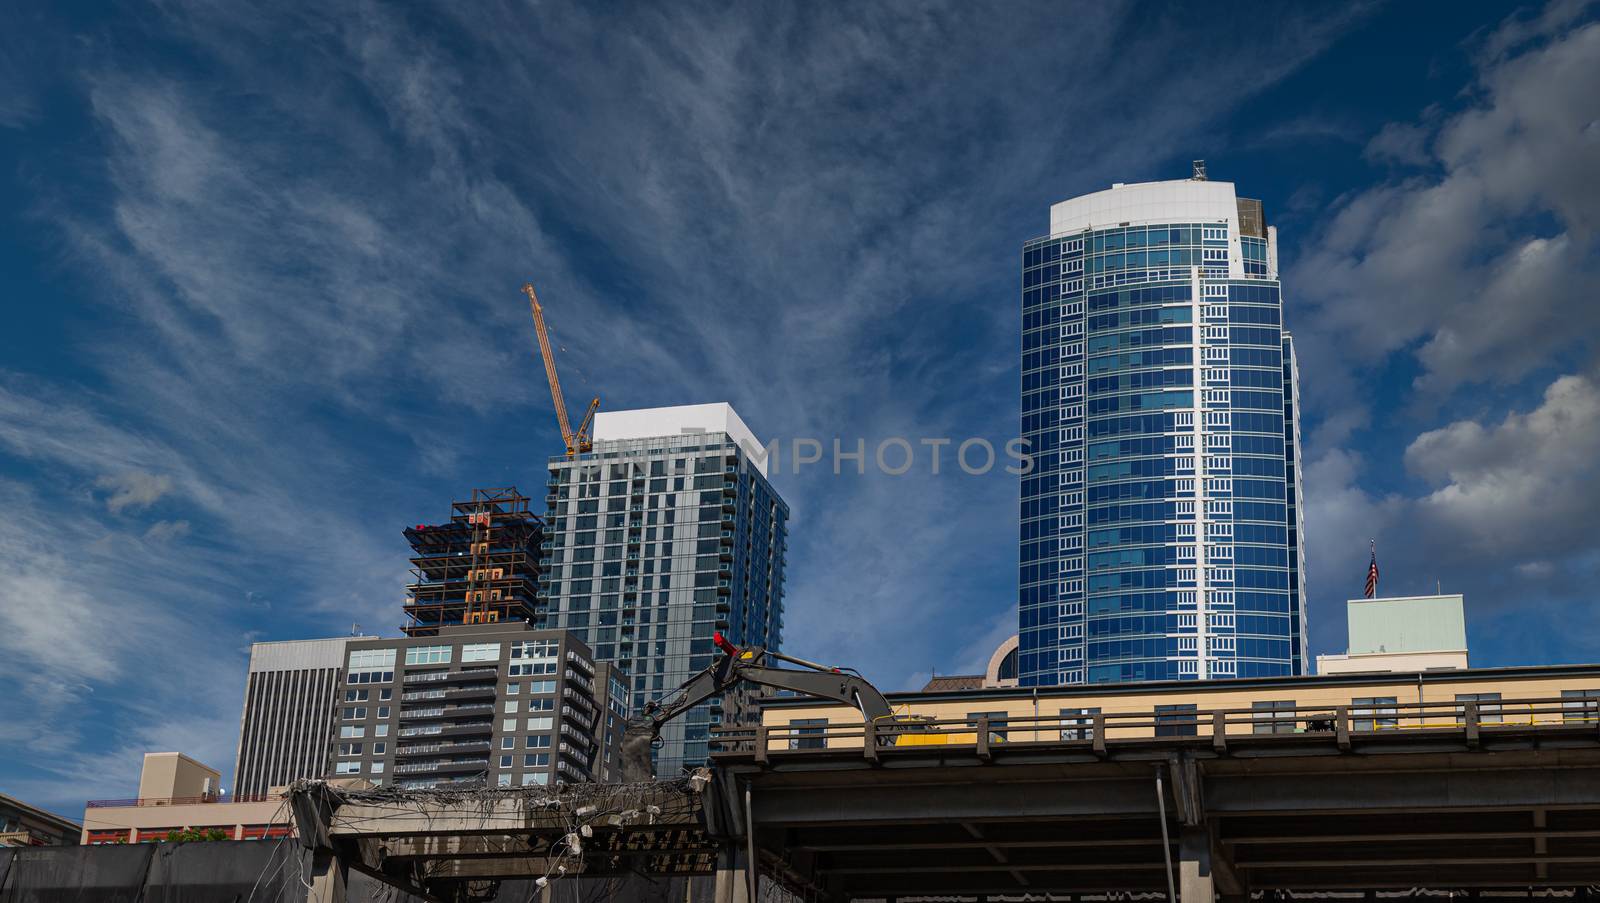 Seattle Viaduct Demolition and Buildings by dbvirago